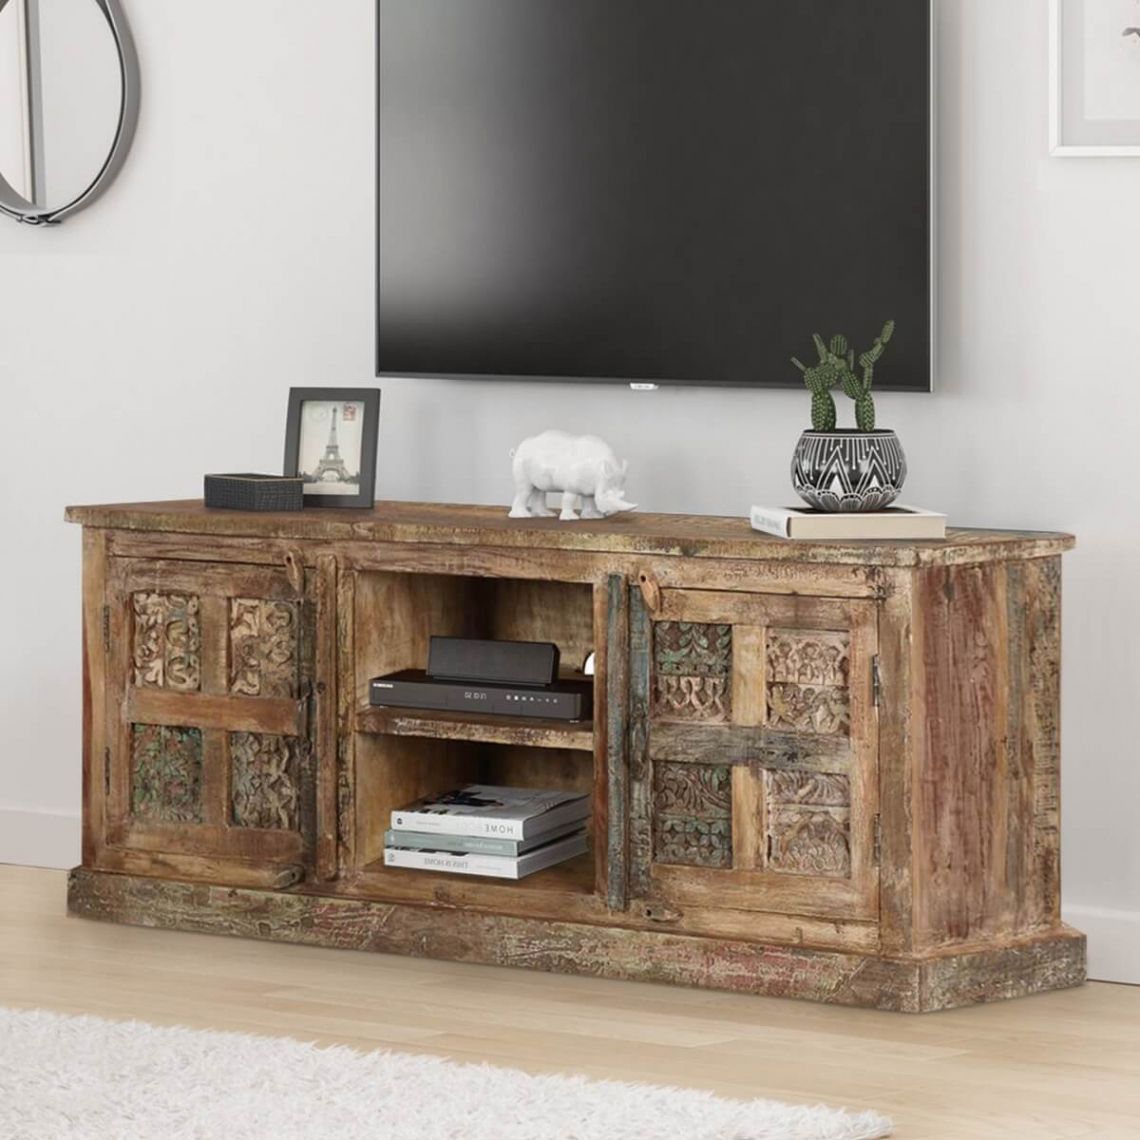 Lovely Distressed Wood Tv Stand | Ch20 Webmaster Intended For Wooden Tv Stands (View 9 of 15)